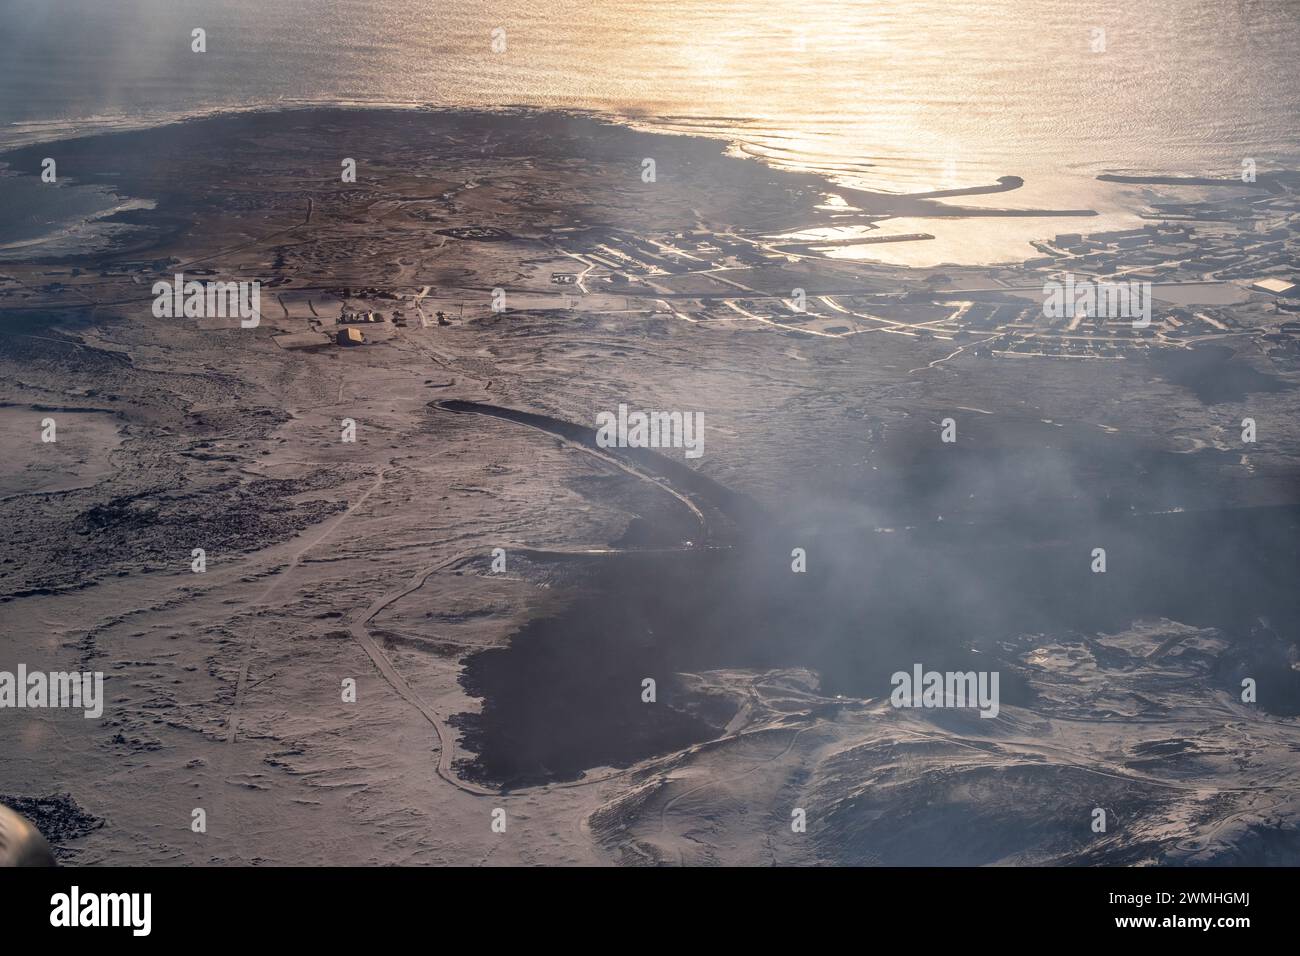 Aerial view of lava flow at Grindavik, Iceland Stock Photo